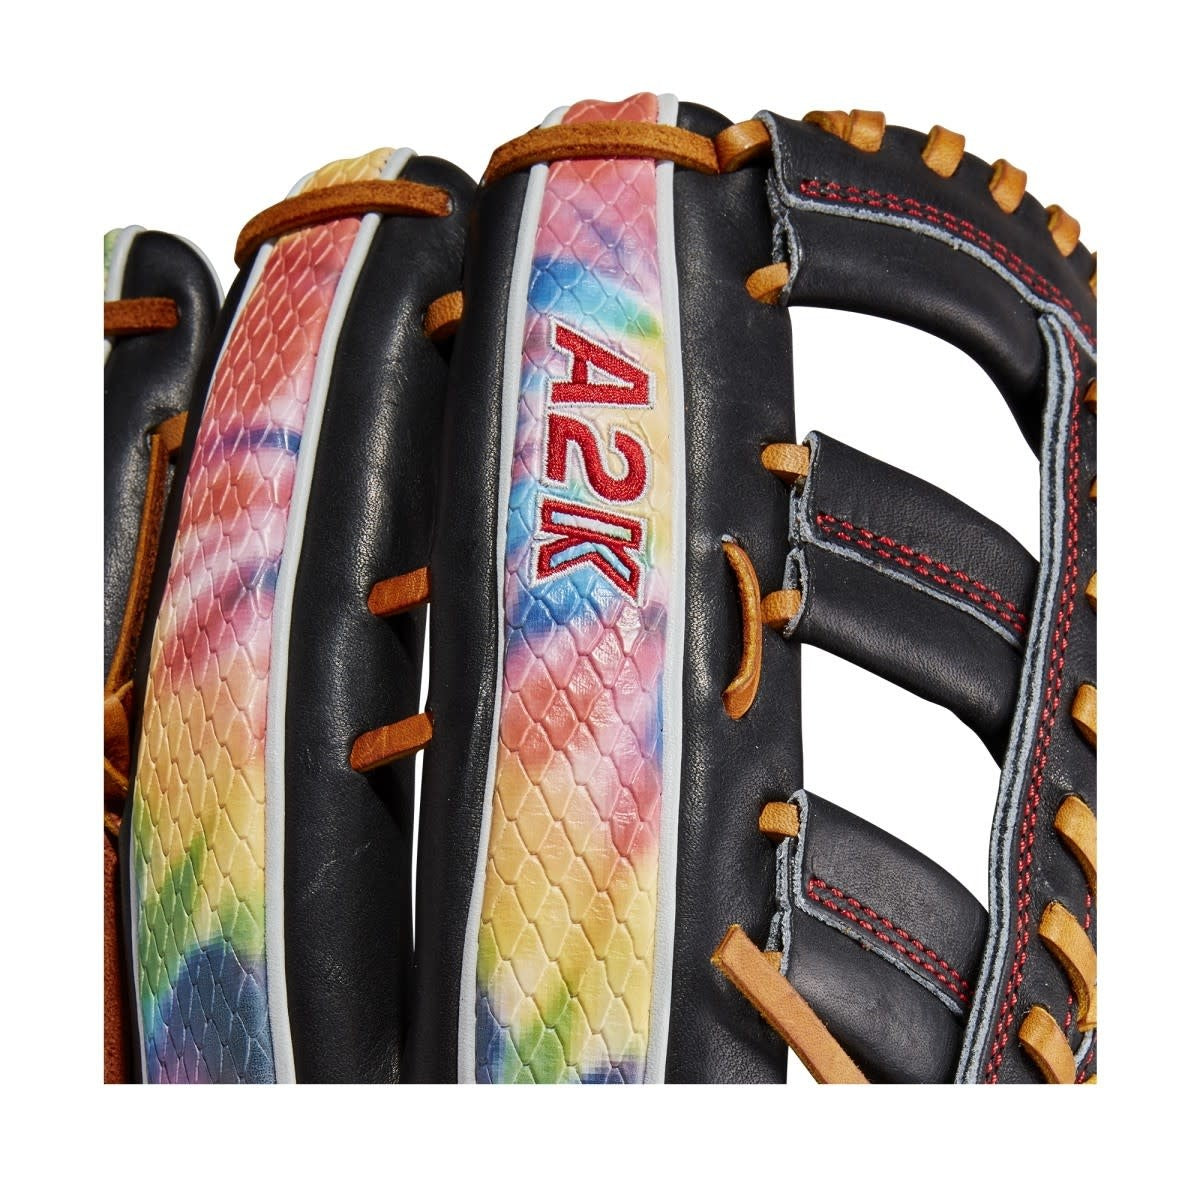 Wilson A2K® 1810SS 12.75" Outfield Baseball Glove - Limited Edition - LHT